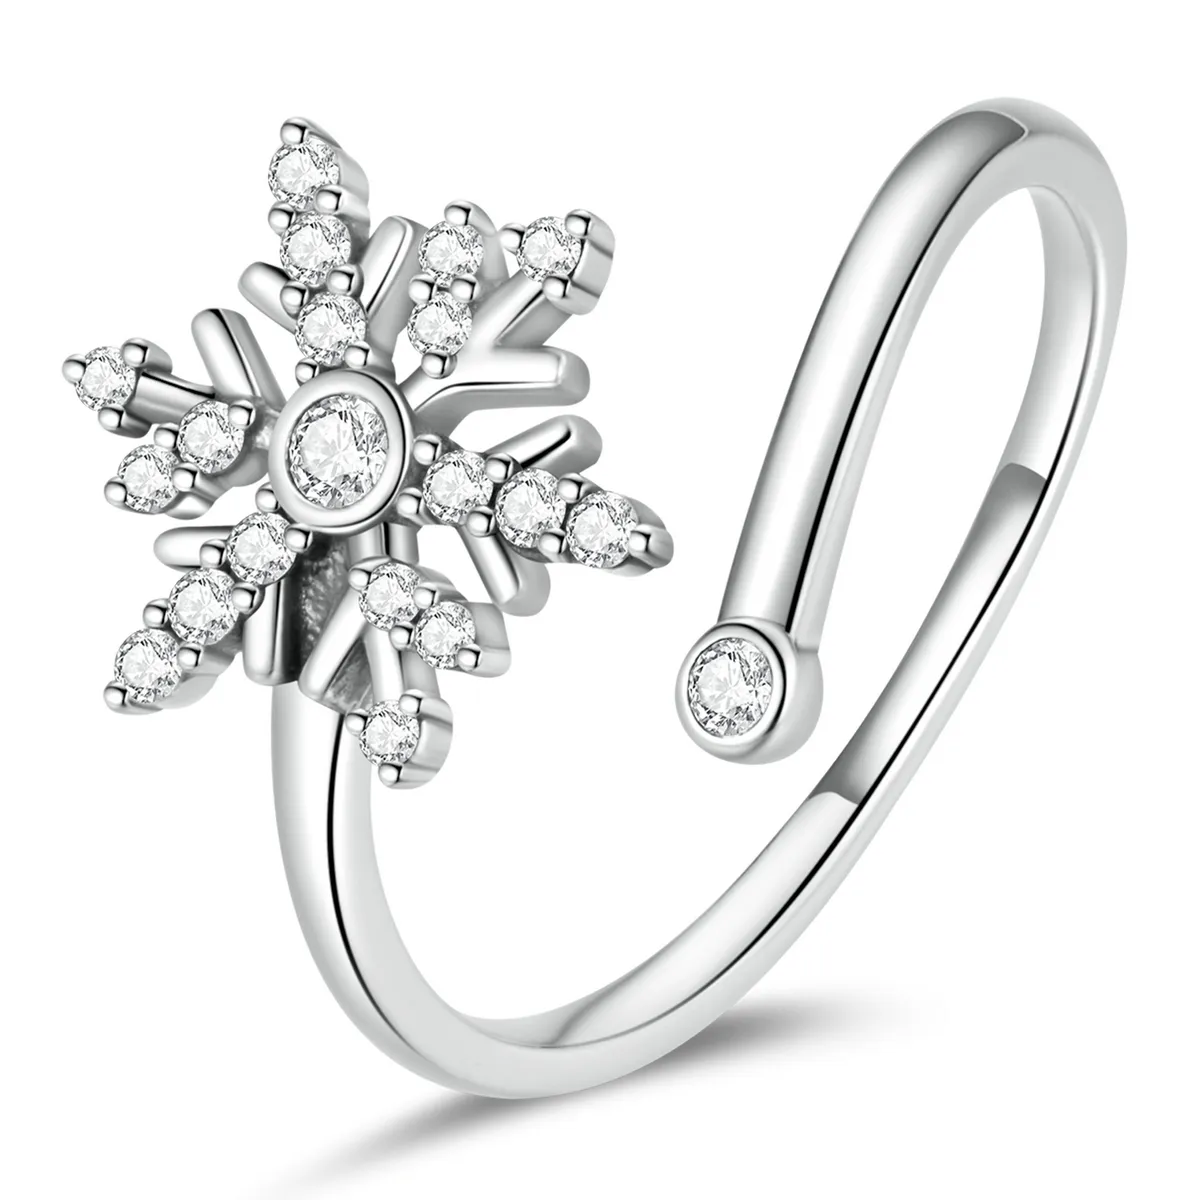 Pandora Style Beautiful Snowflakes Open Ring - BSR214